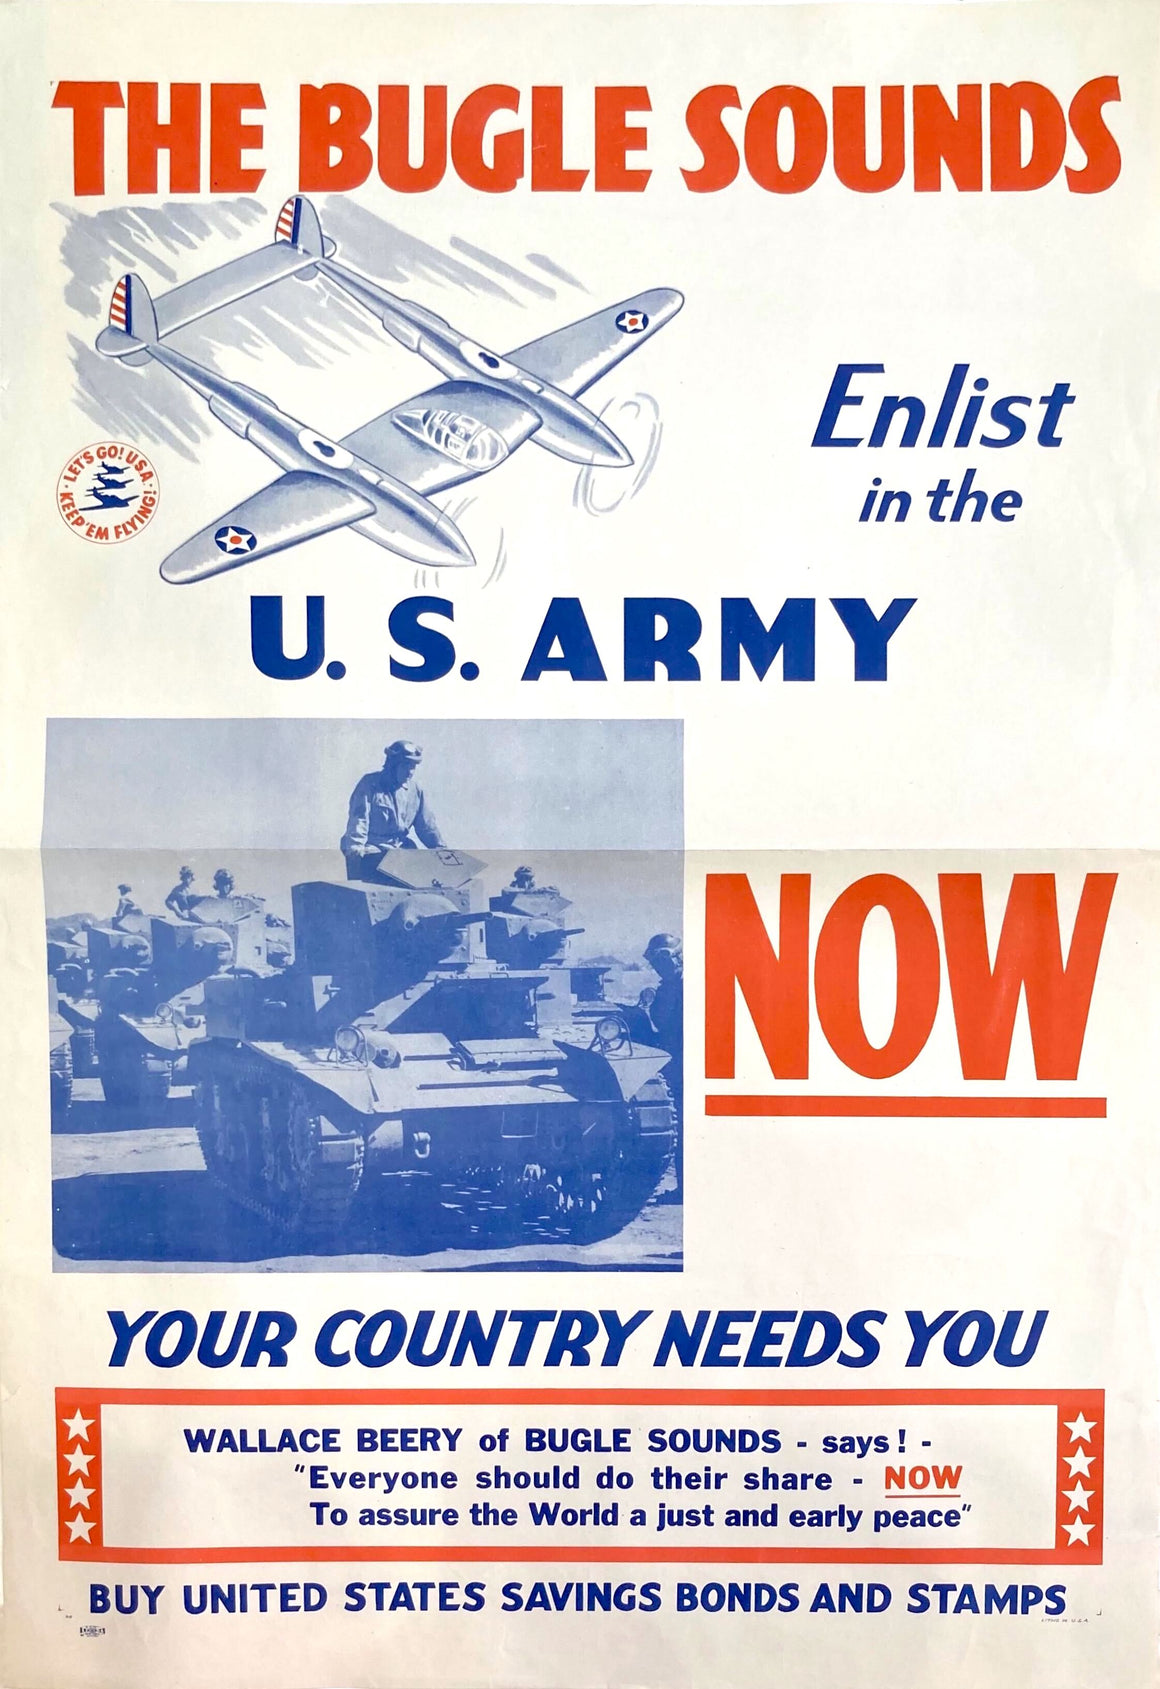 "The Bugle Sounds, Enlist in the U.S. Army Now" Vintage WWII Army Recruitment Poster